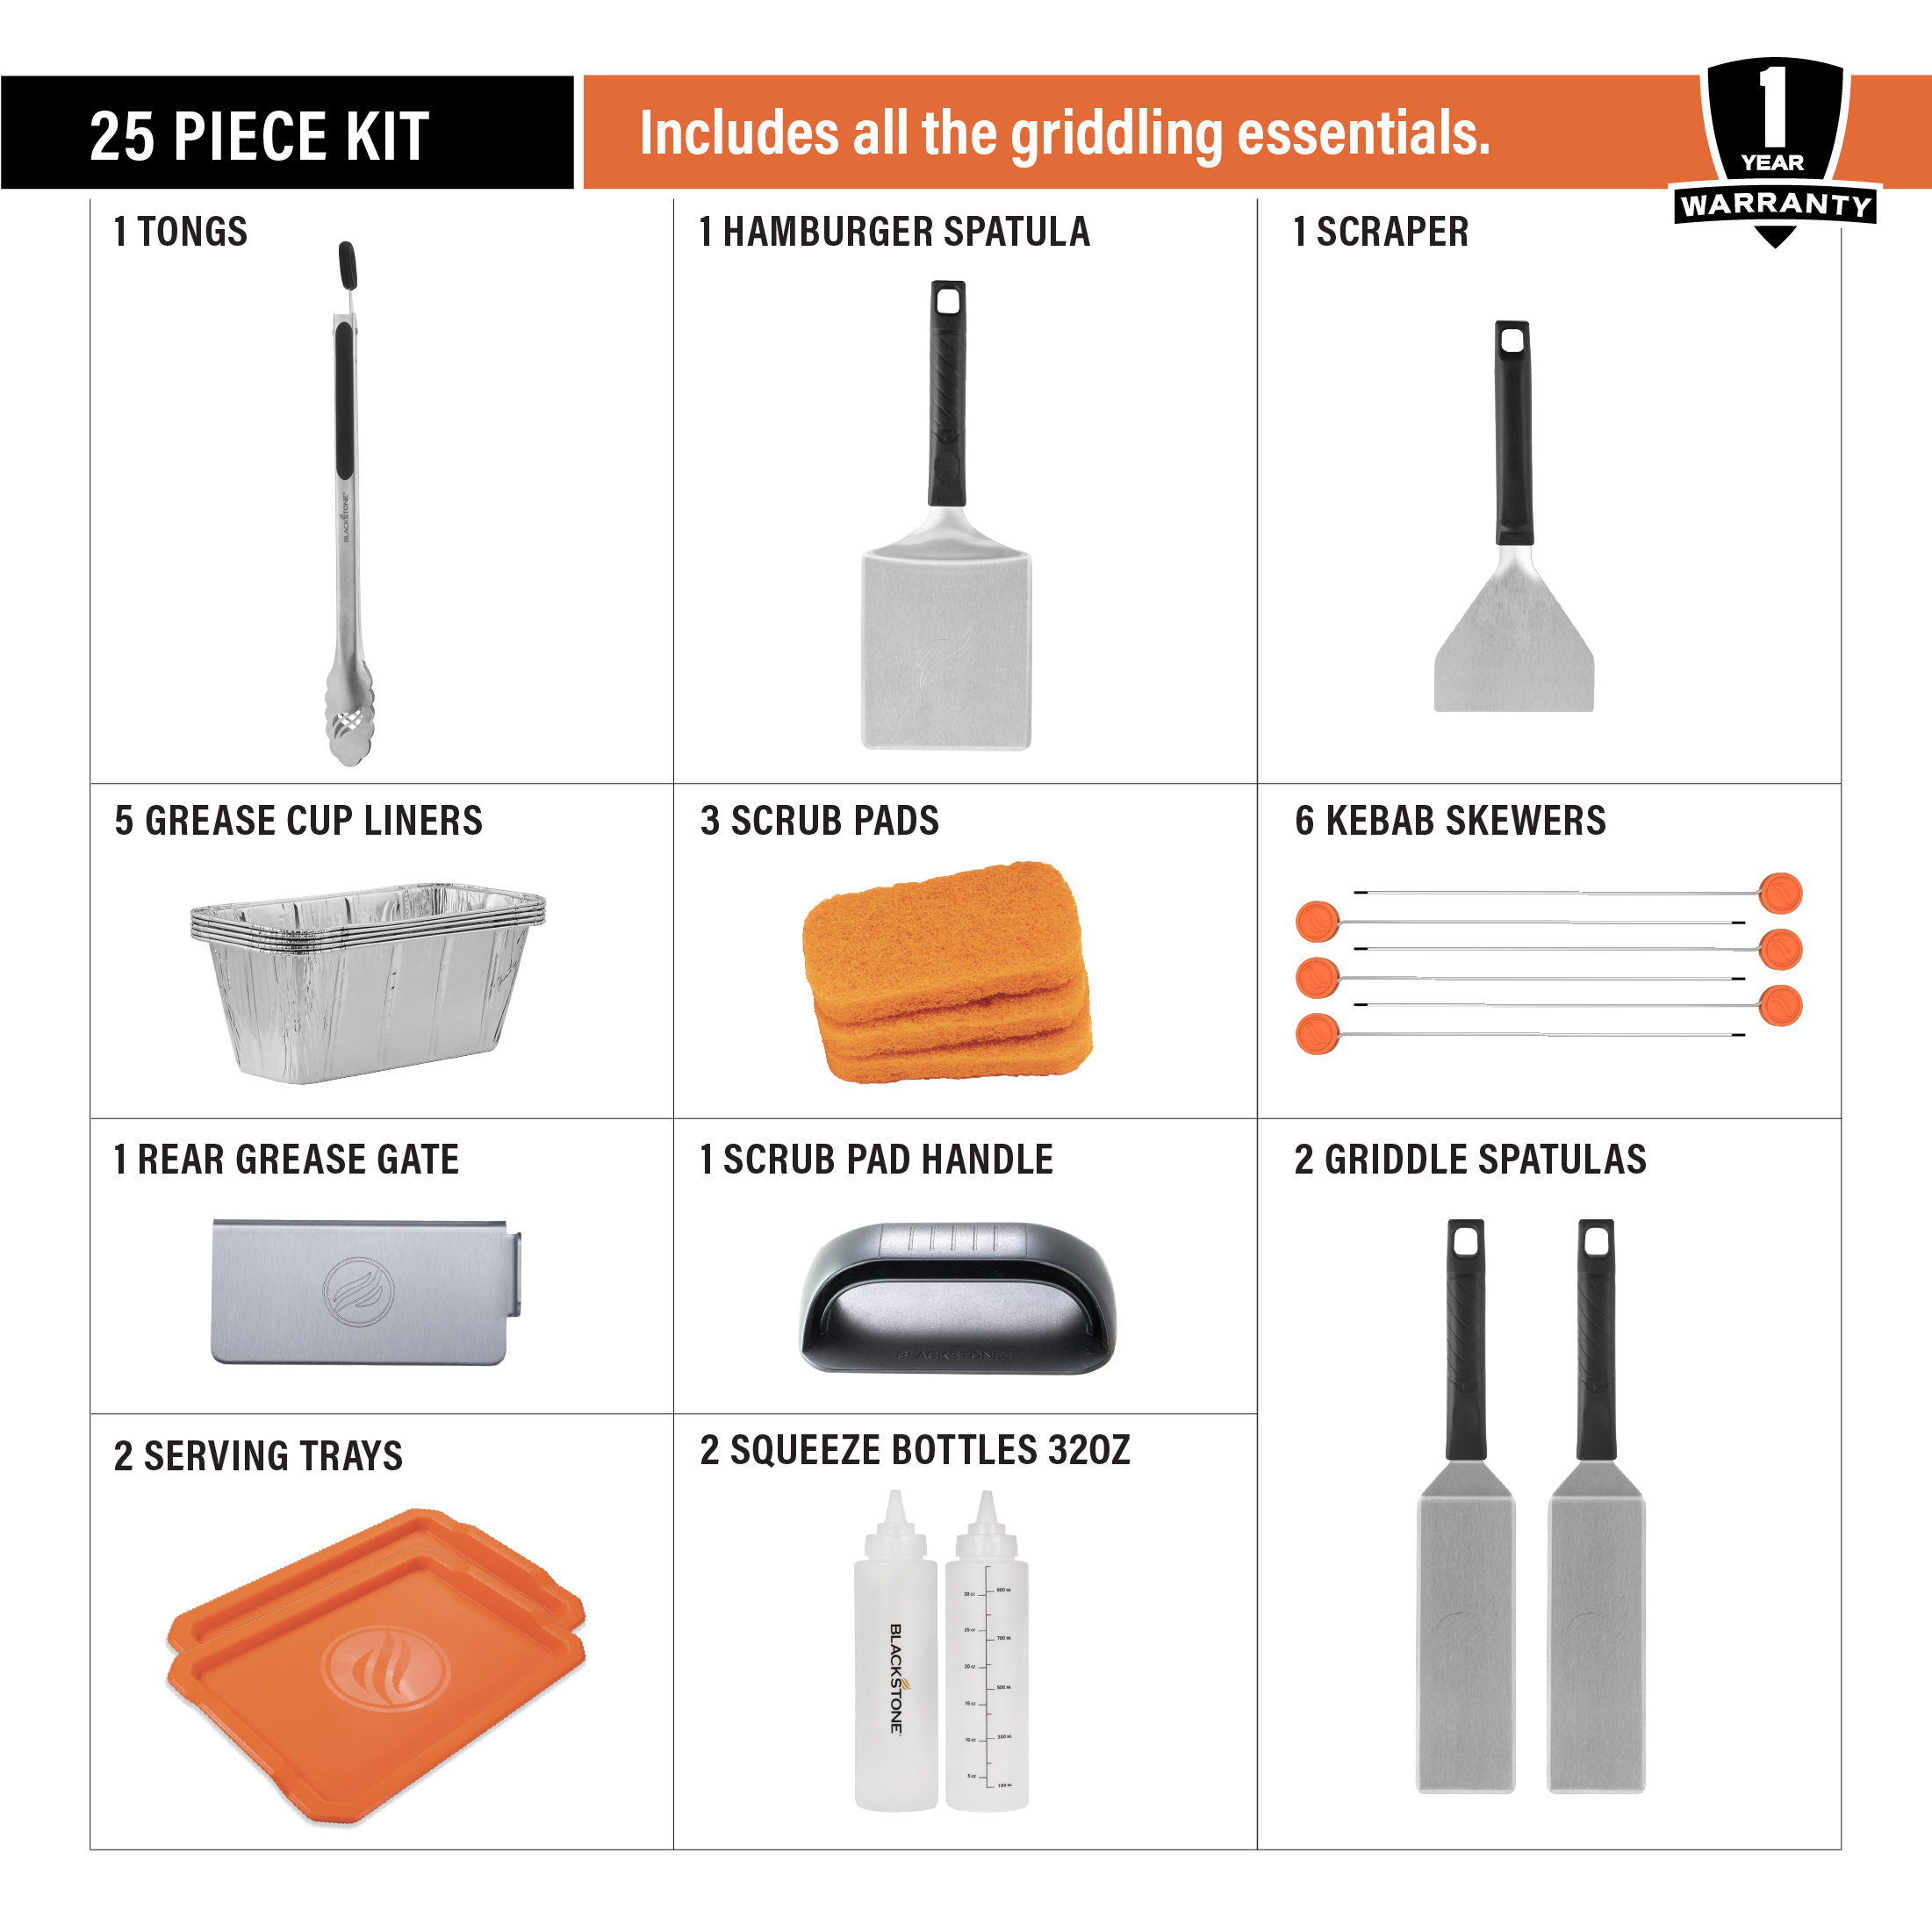 Blackstone 25 Piece Griddle Tool Kit Gift Set for Outdoor Cooking - image 3 of 13